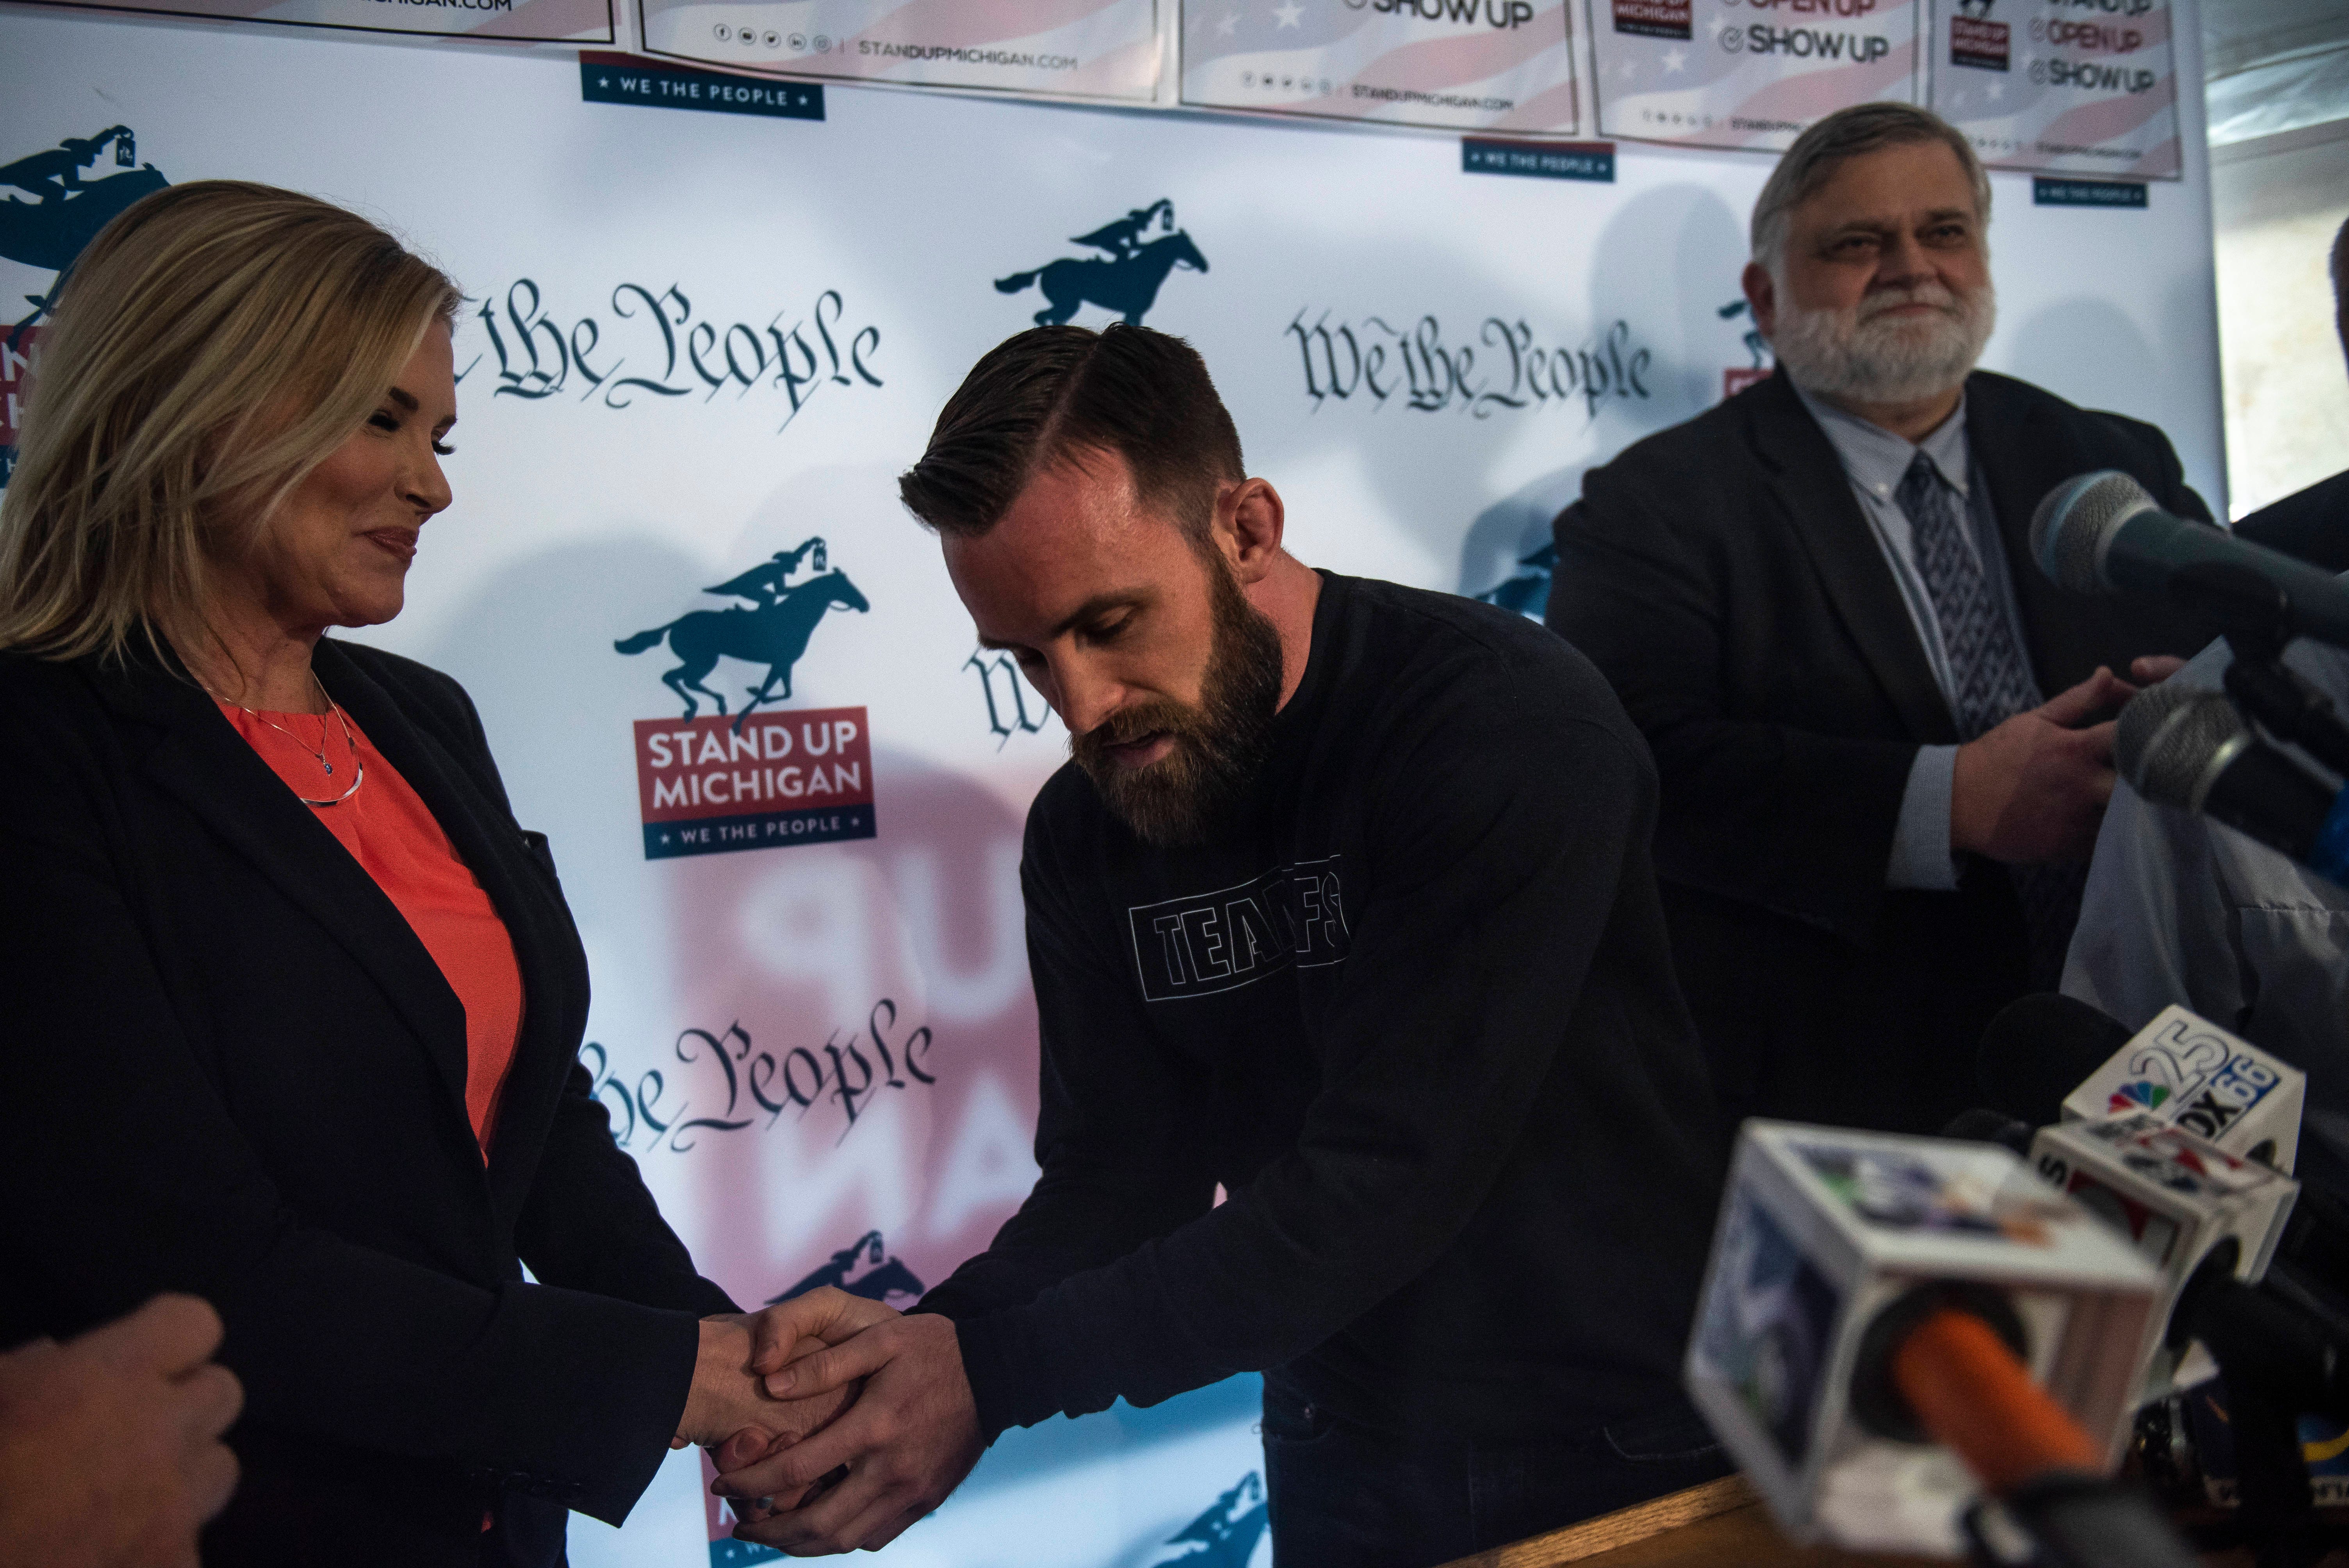 North Dallas, Texas salon owner Shelley Luther, left, and James Gray, owner of Michigan Institute Athletics in Brighton, Mich. shake hands during the press conference